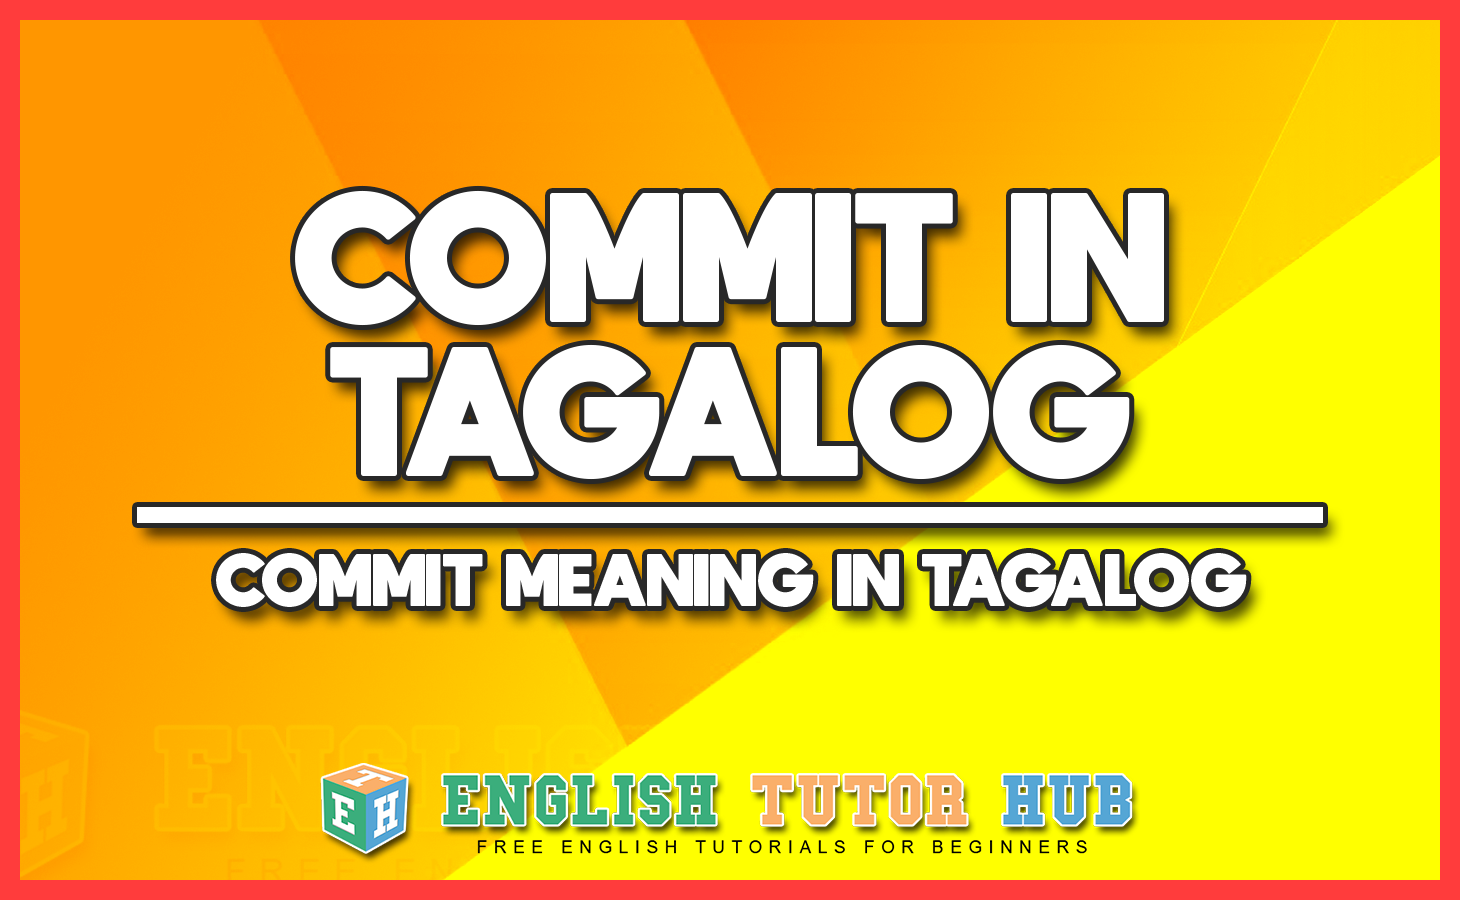 COMMIT IN TAGALOG - COMMIT MEANING IN TAGALOG